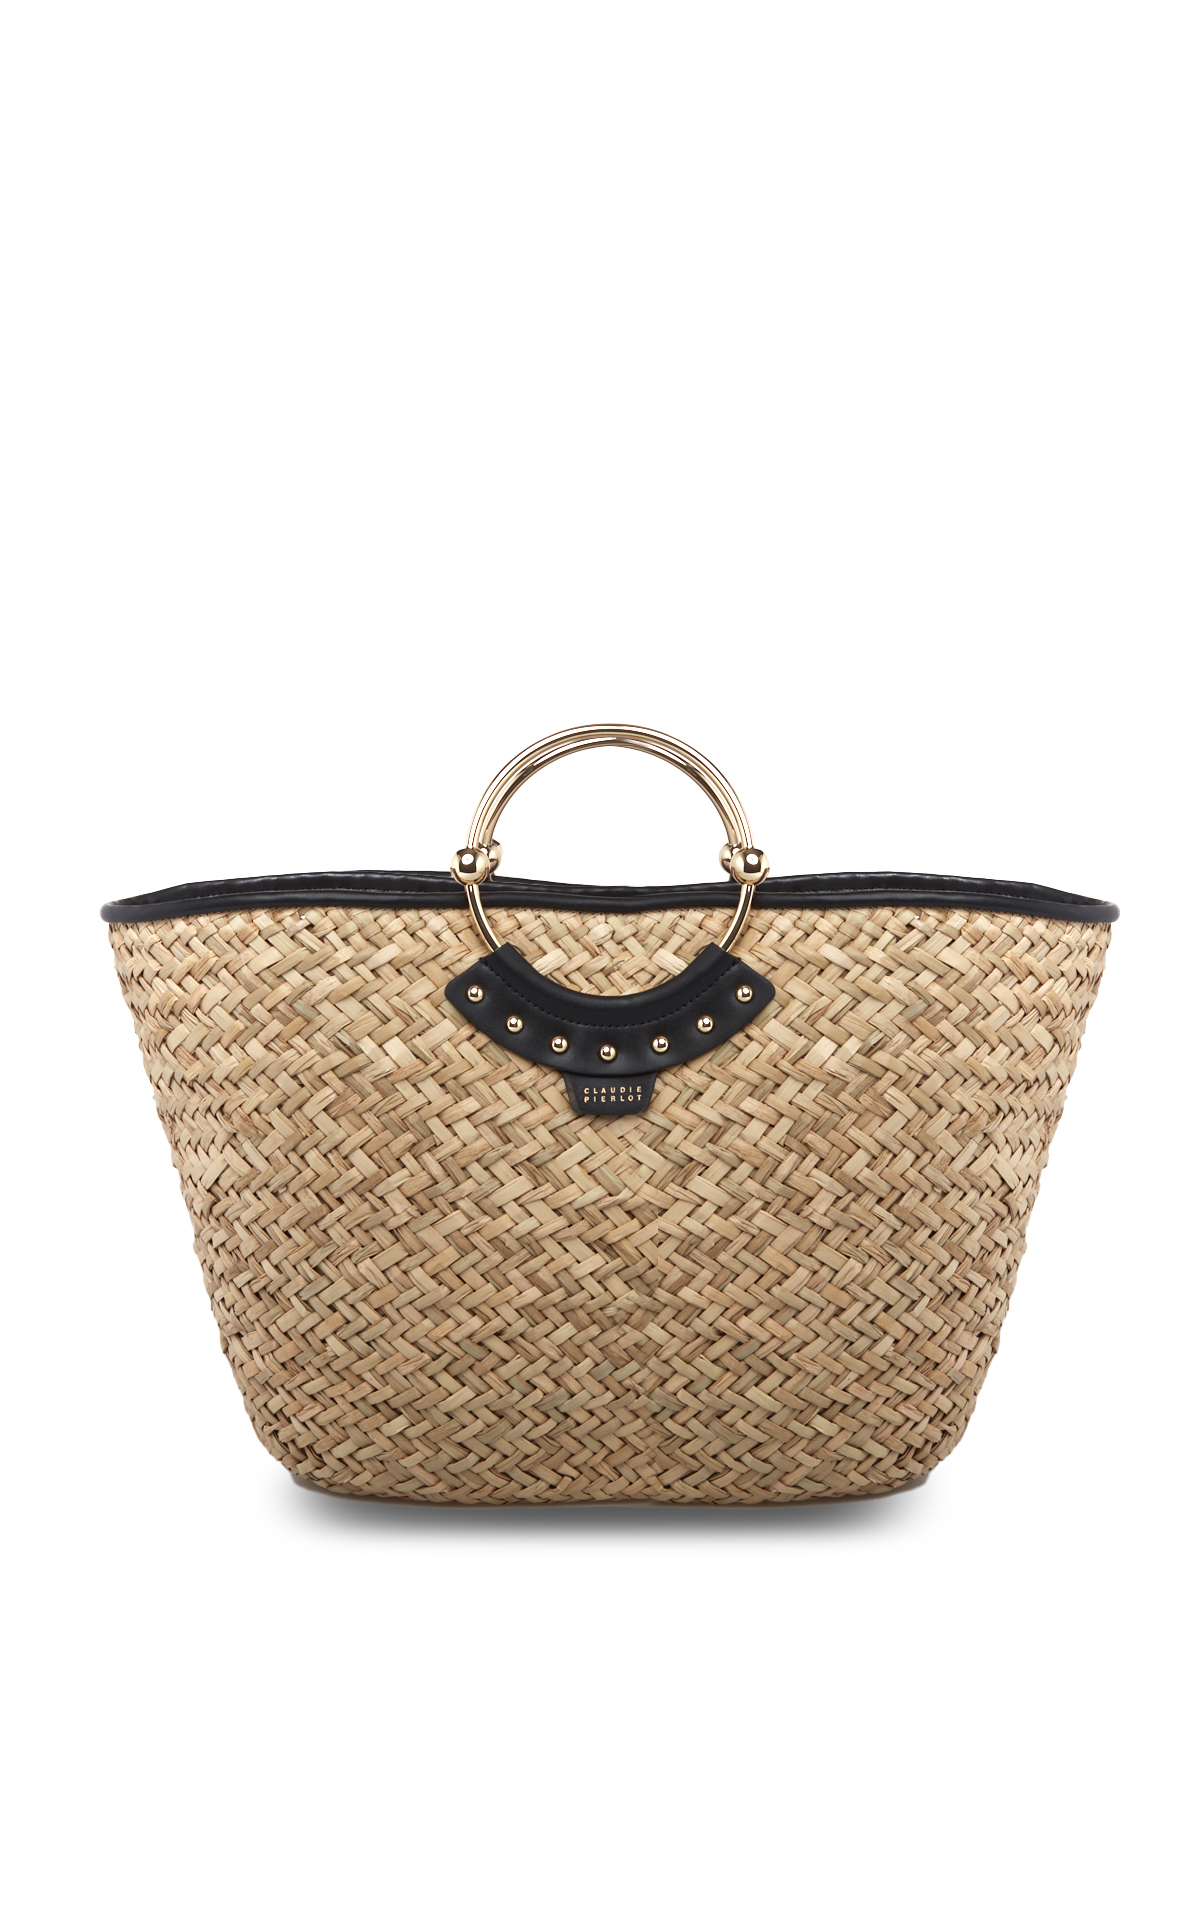 Black leather and wicker bag